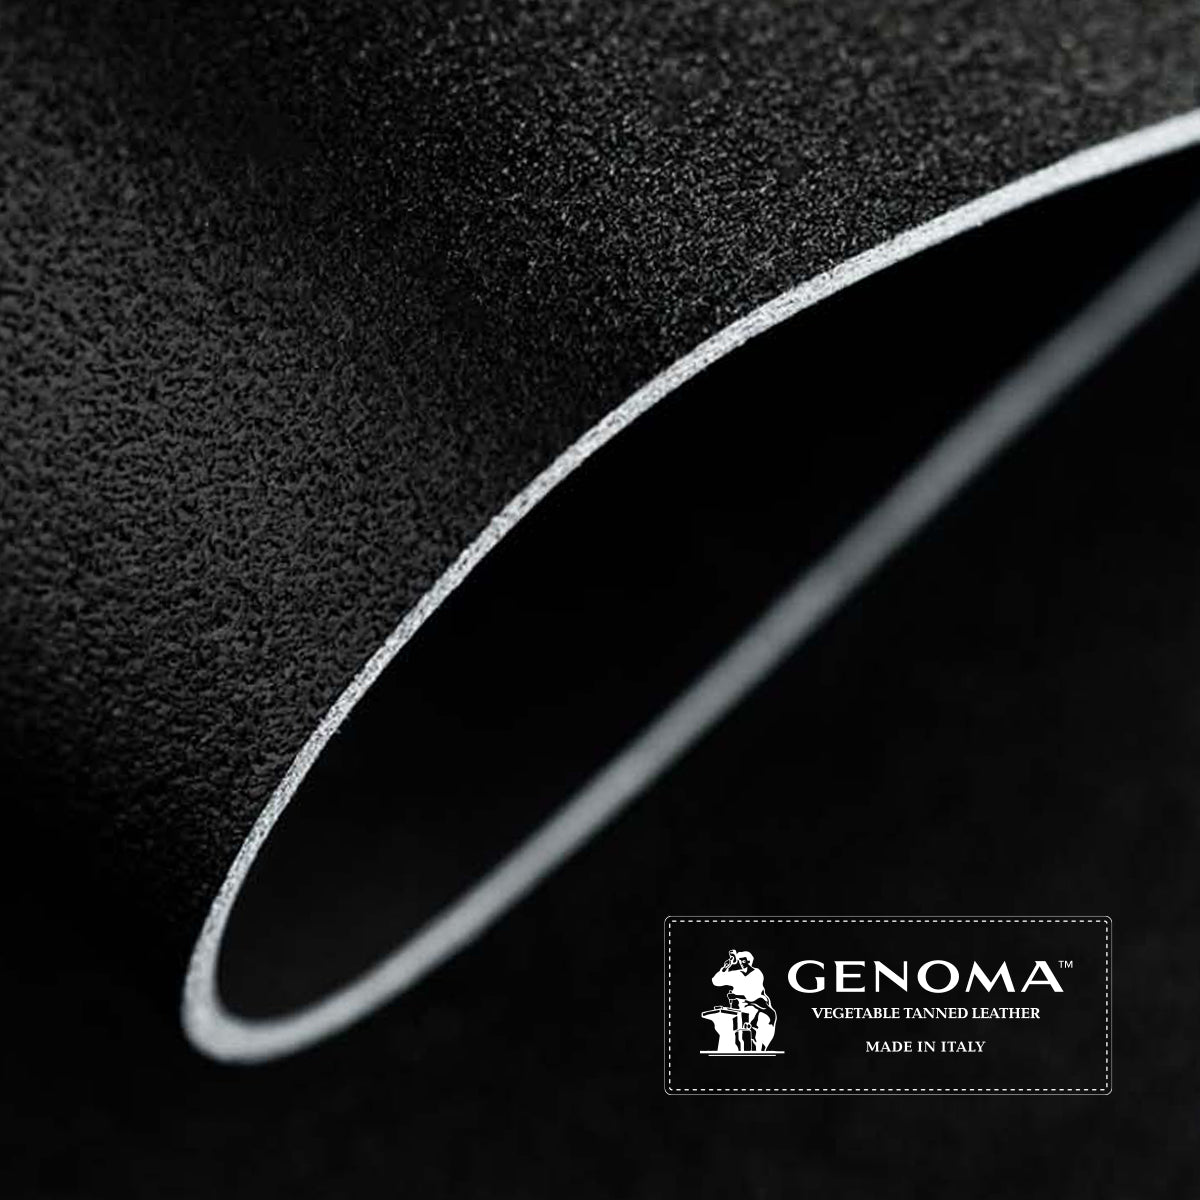 ACS06601 - iPhone 15 Pro Max Case Enzo (MagFit) in black showing the genoma vegetable tanned leather that is made in Italy.